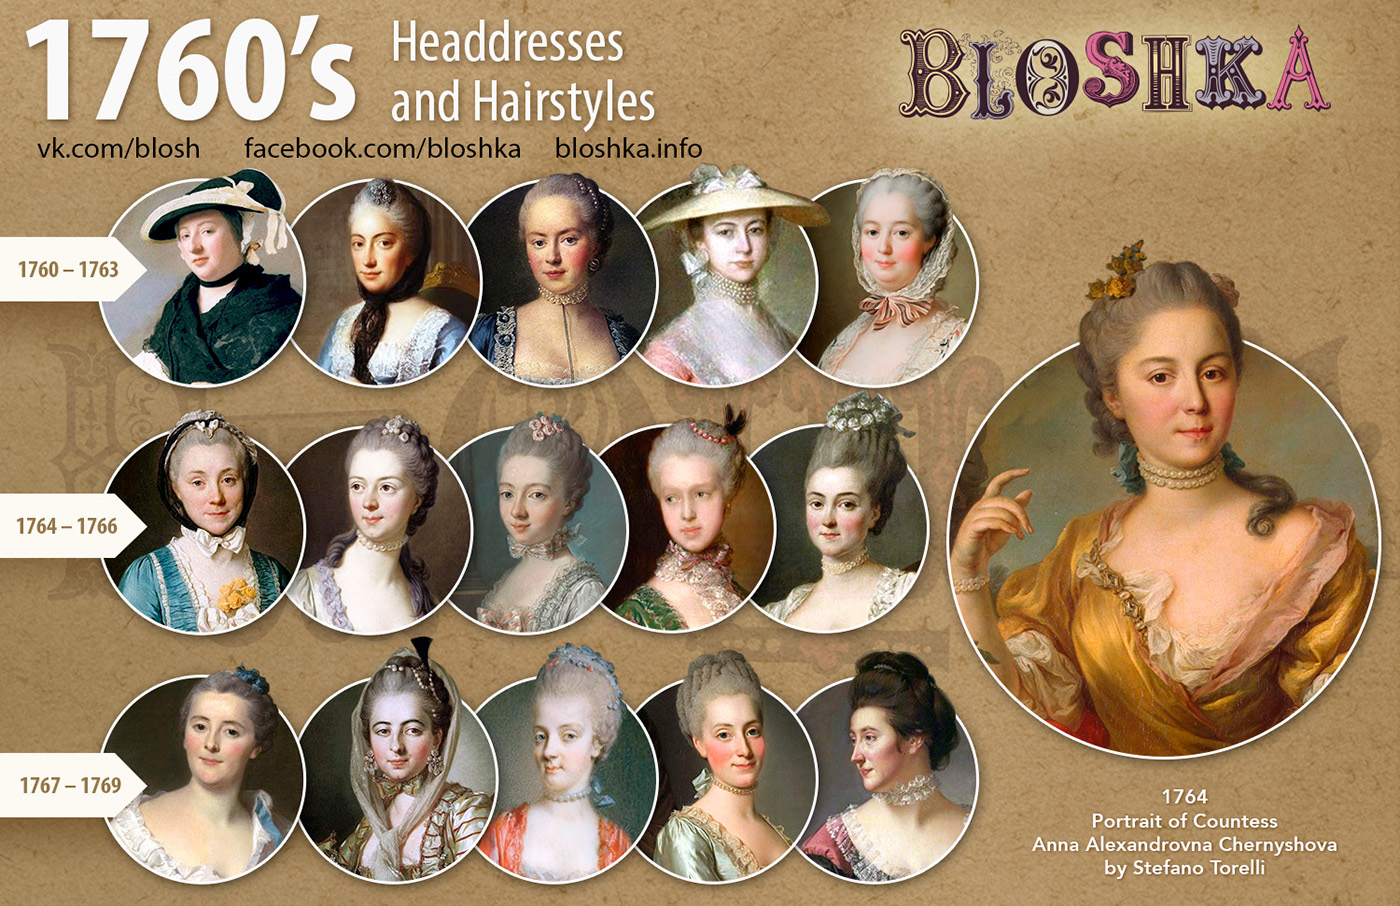 Women's headdresses and hairstyles. 18th century. on Behance